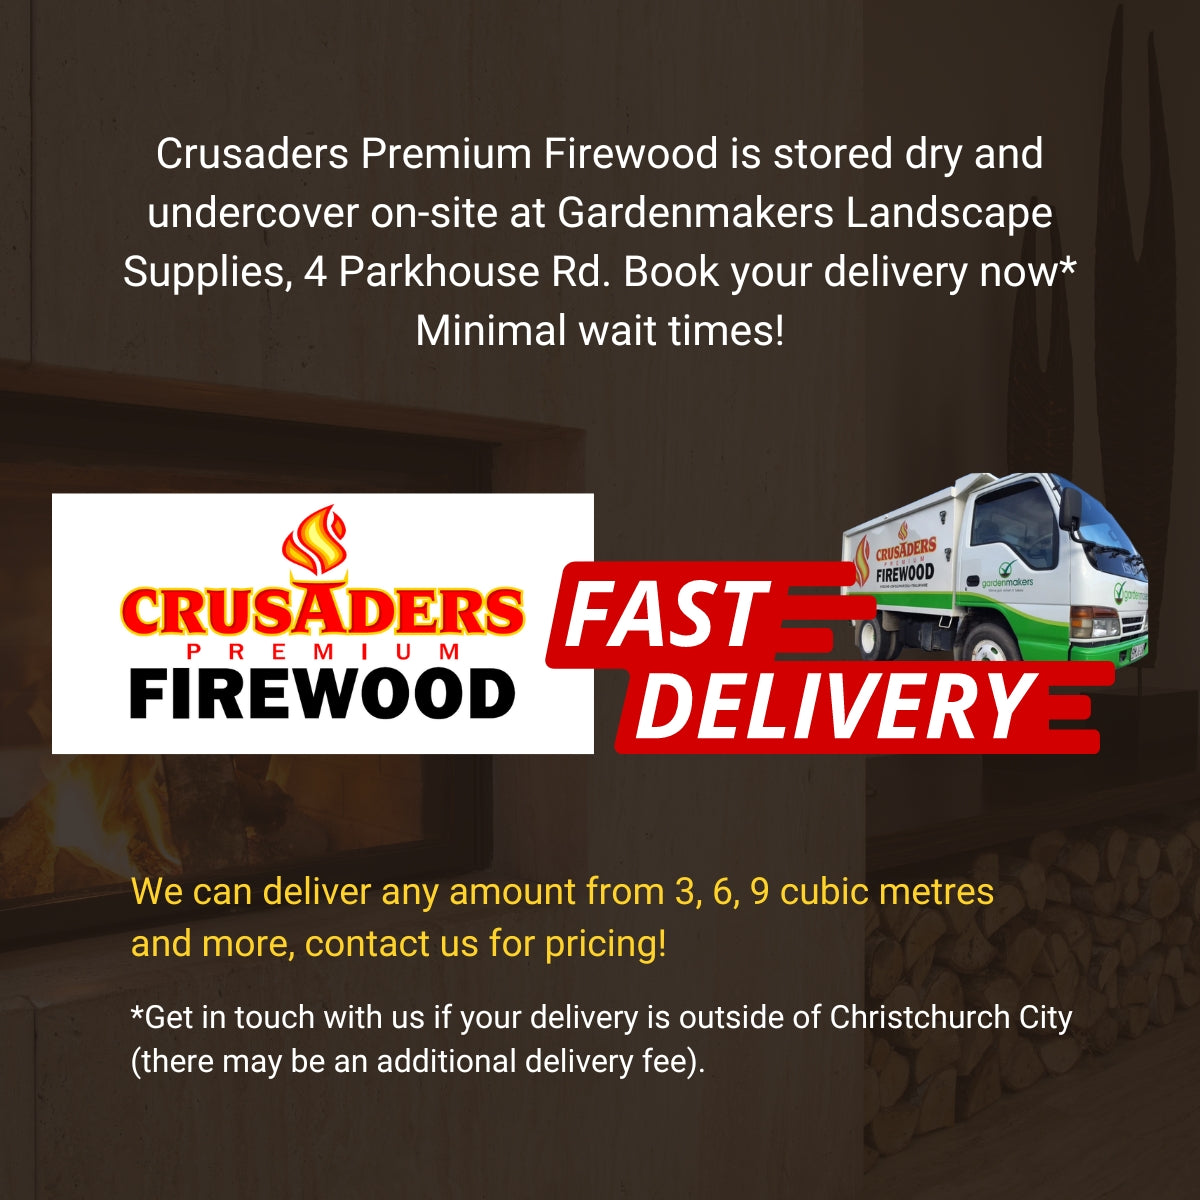 Crusaders Premium Firewood - Beech Delivery